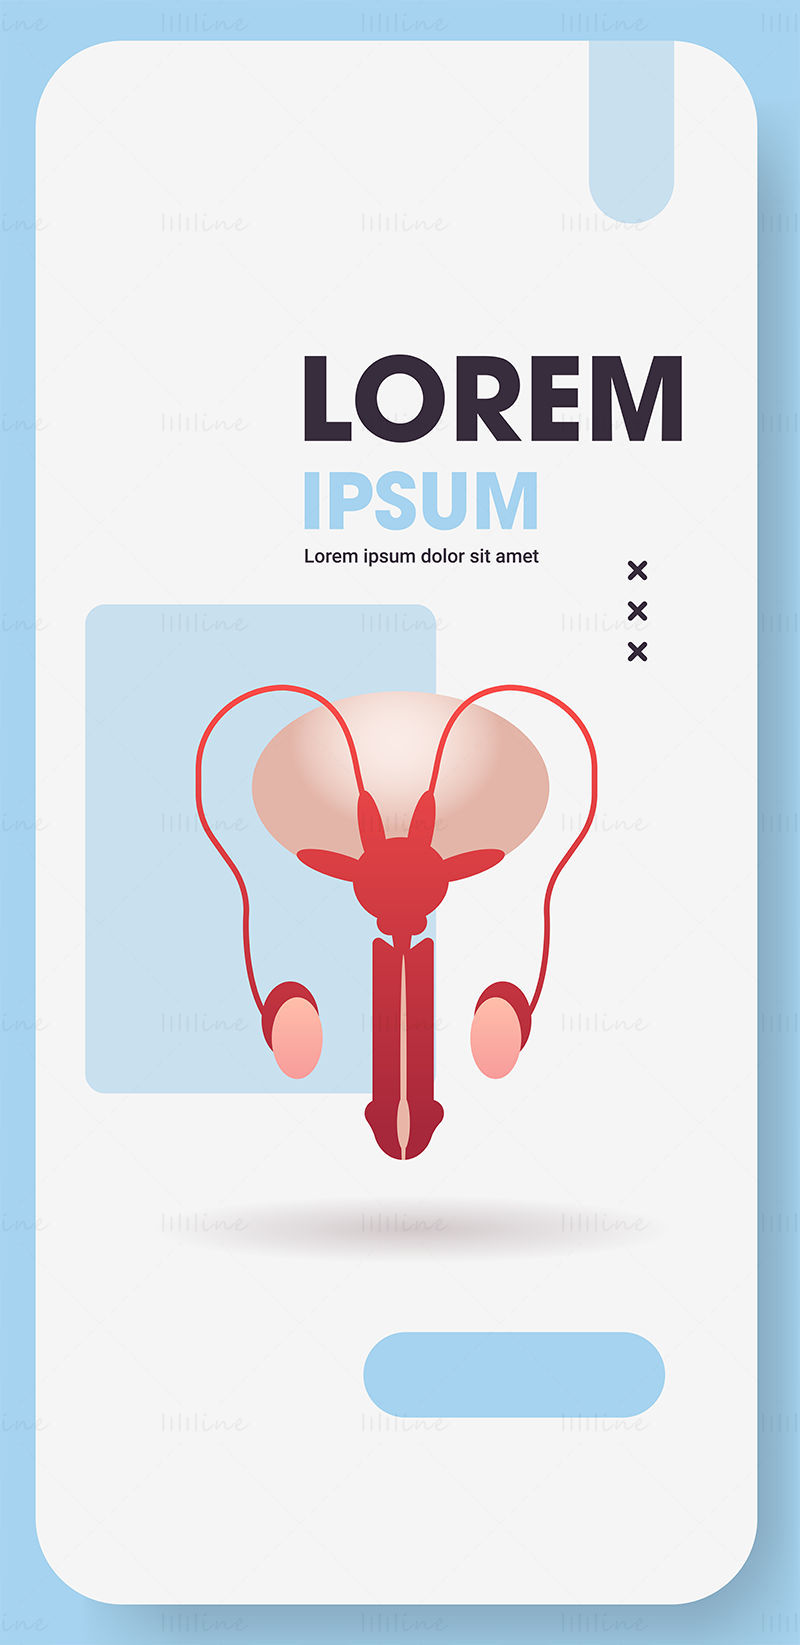 Male reproductive system illustration